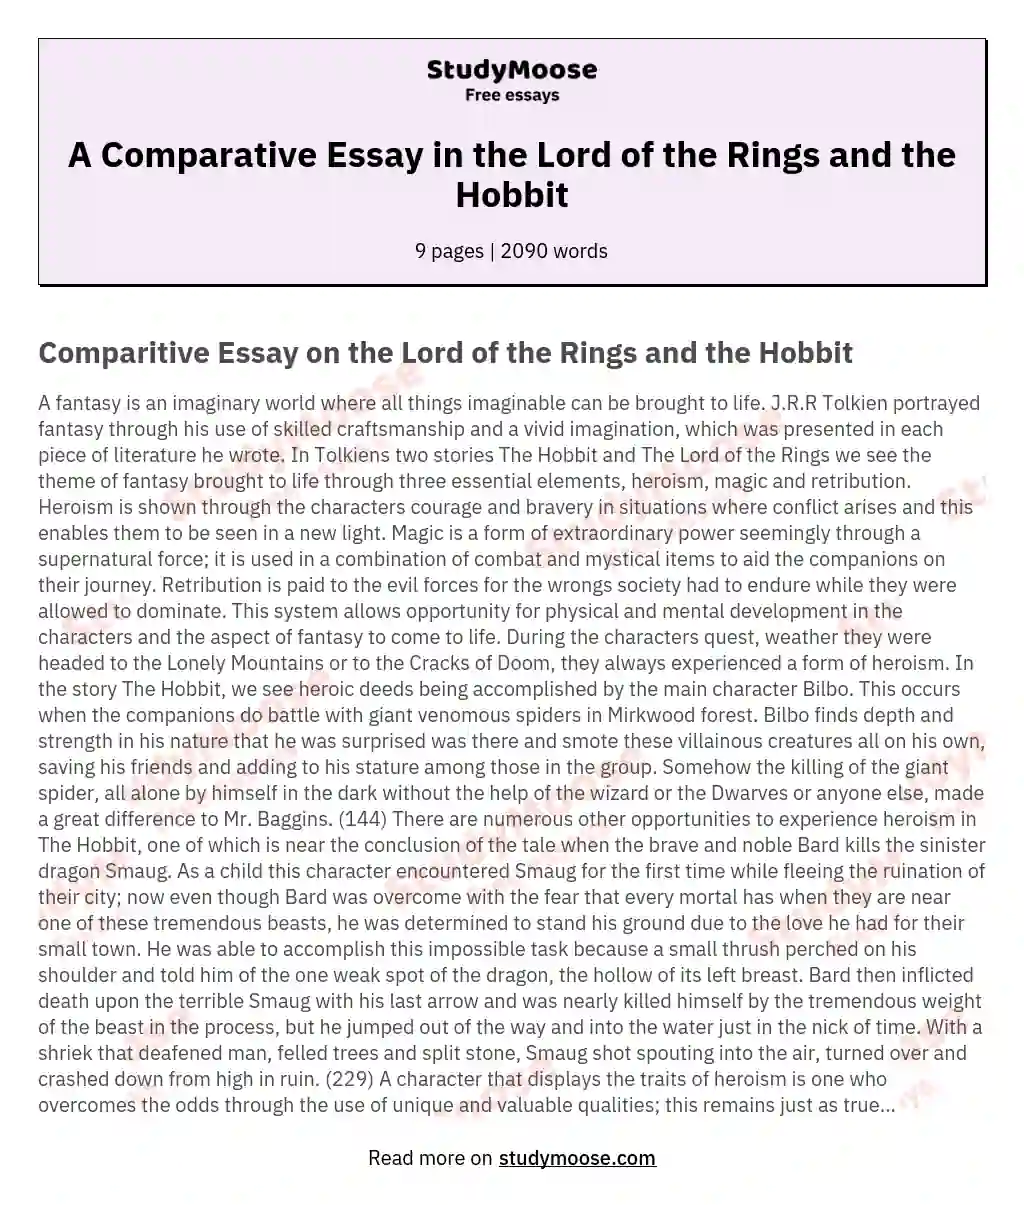 A Comparative Essay in the Lord of the Rings and the Hobbit essay